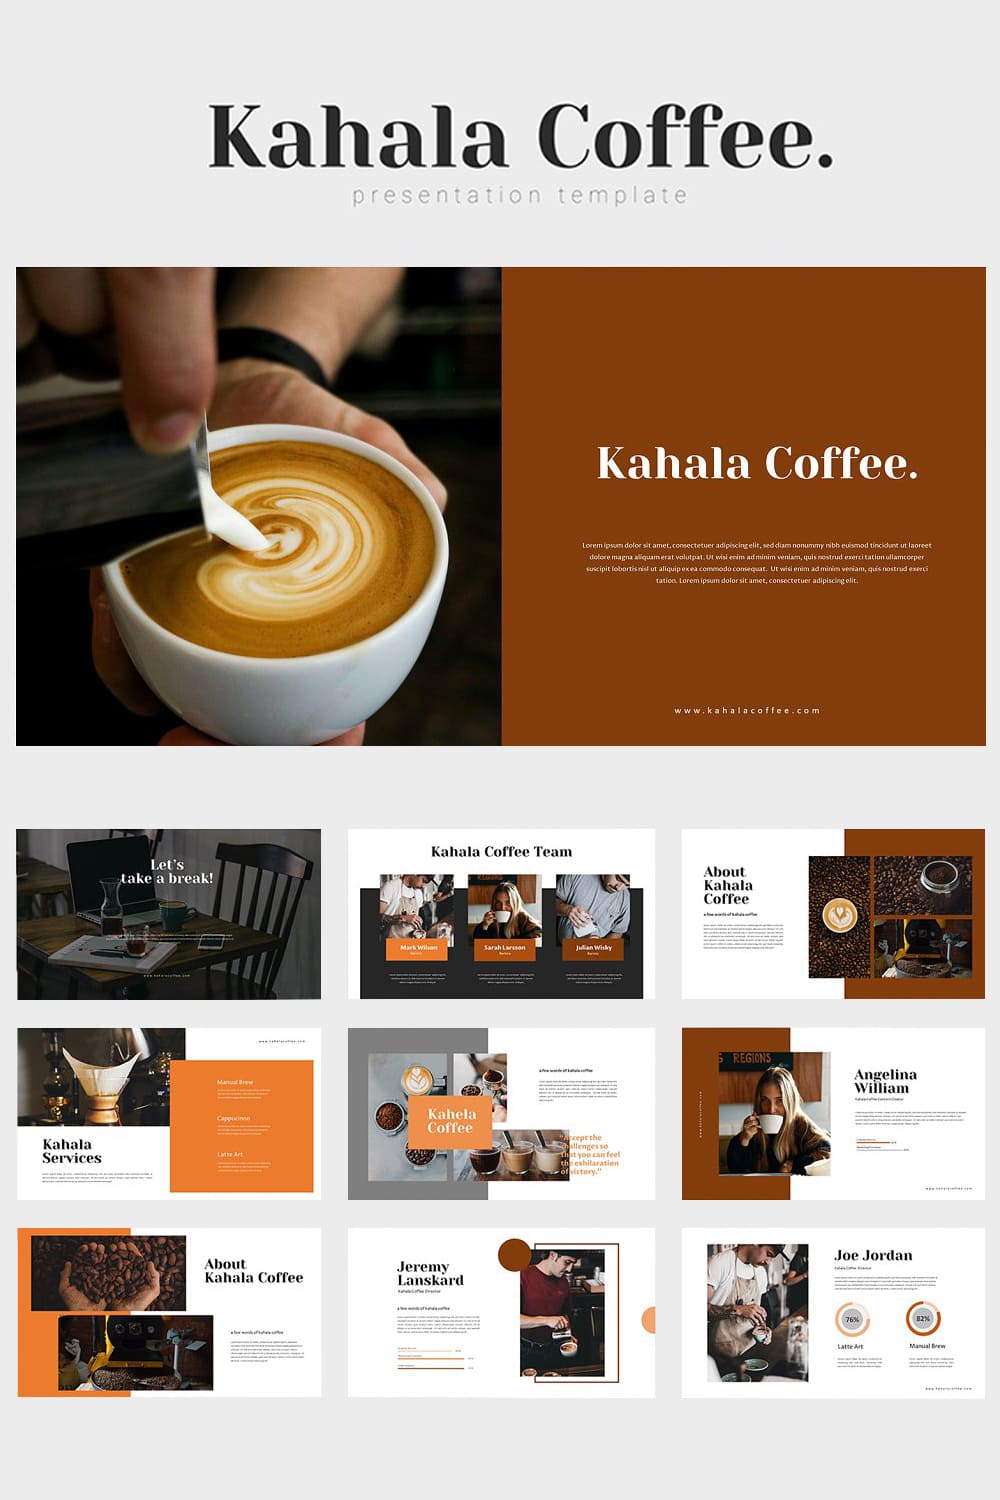 Kahala - Coffee Google Slides is a multipurpose Google Slides template that can be used for any type of presentation.